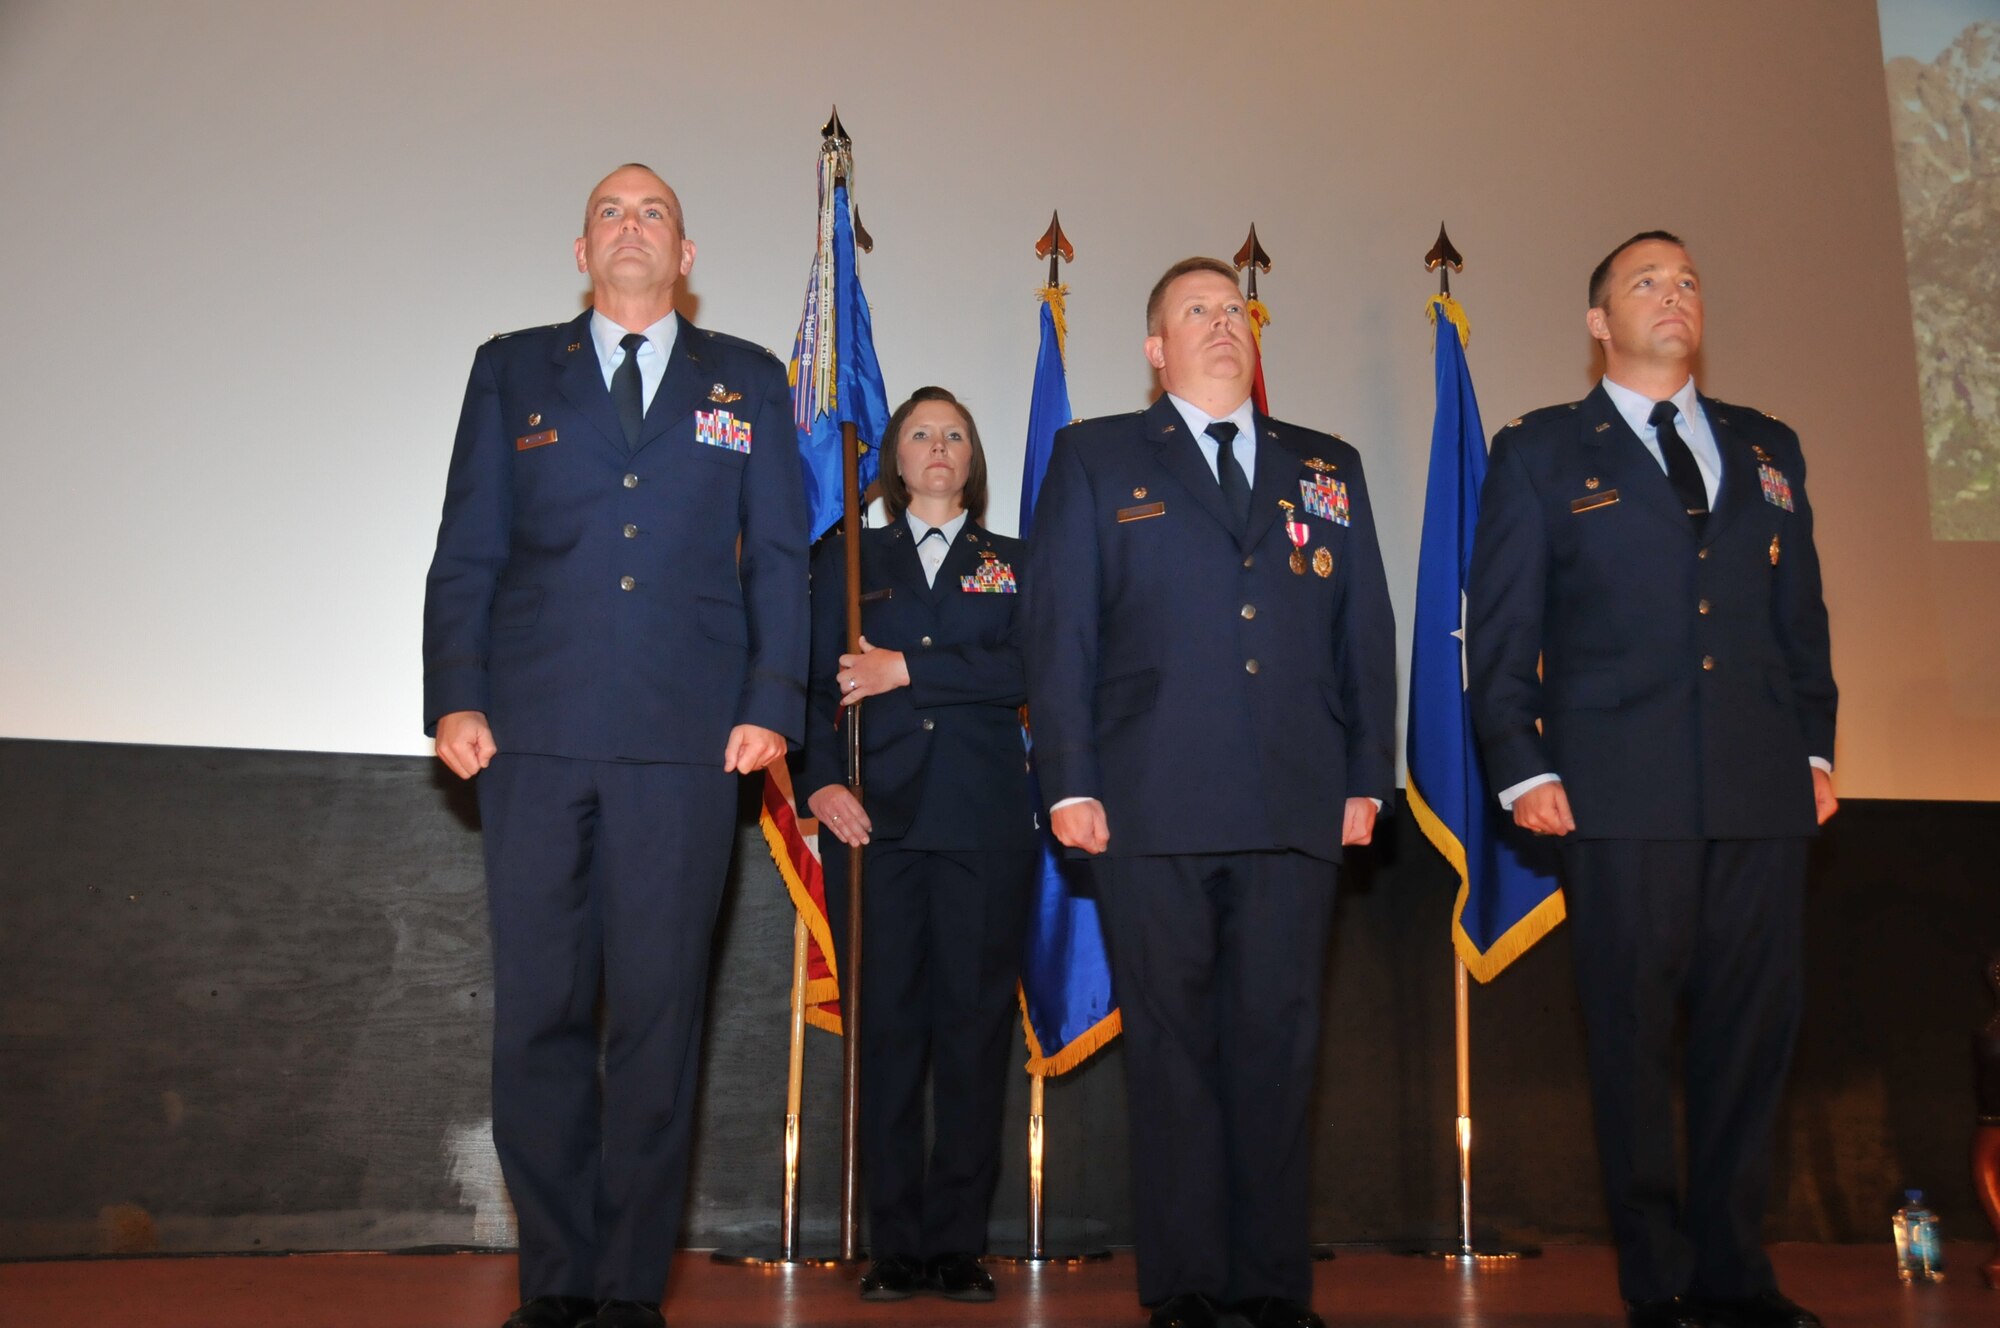 Col. Andrew McIntyre, 19th Operations Group commander, Lt. Col. Rodney Simpson, outgoing 30th Airlift Squadron commander and Lt. Col. Blair Kaiser, incoming 30 AS commander, prepare for a change of command at the F.E. Warren Air Force Base theatre, Cheyenne, Wyo., June 1, 2013. The 30th AS is an active associate flying squadron that partners with the 153rd Airlift Wing, Wyoming Air National Guard. (Air National Guard photo by Staff Sgt. John Galvin)